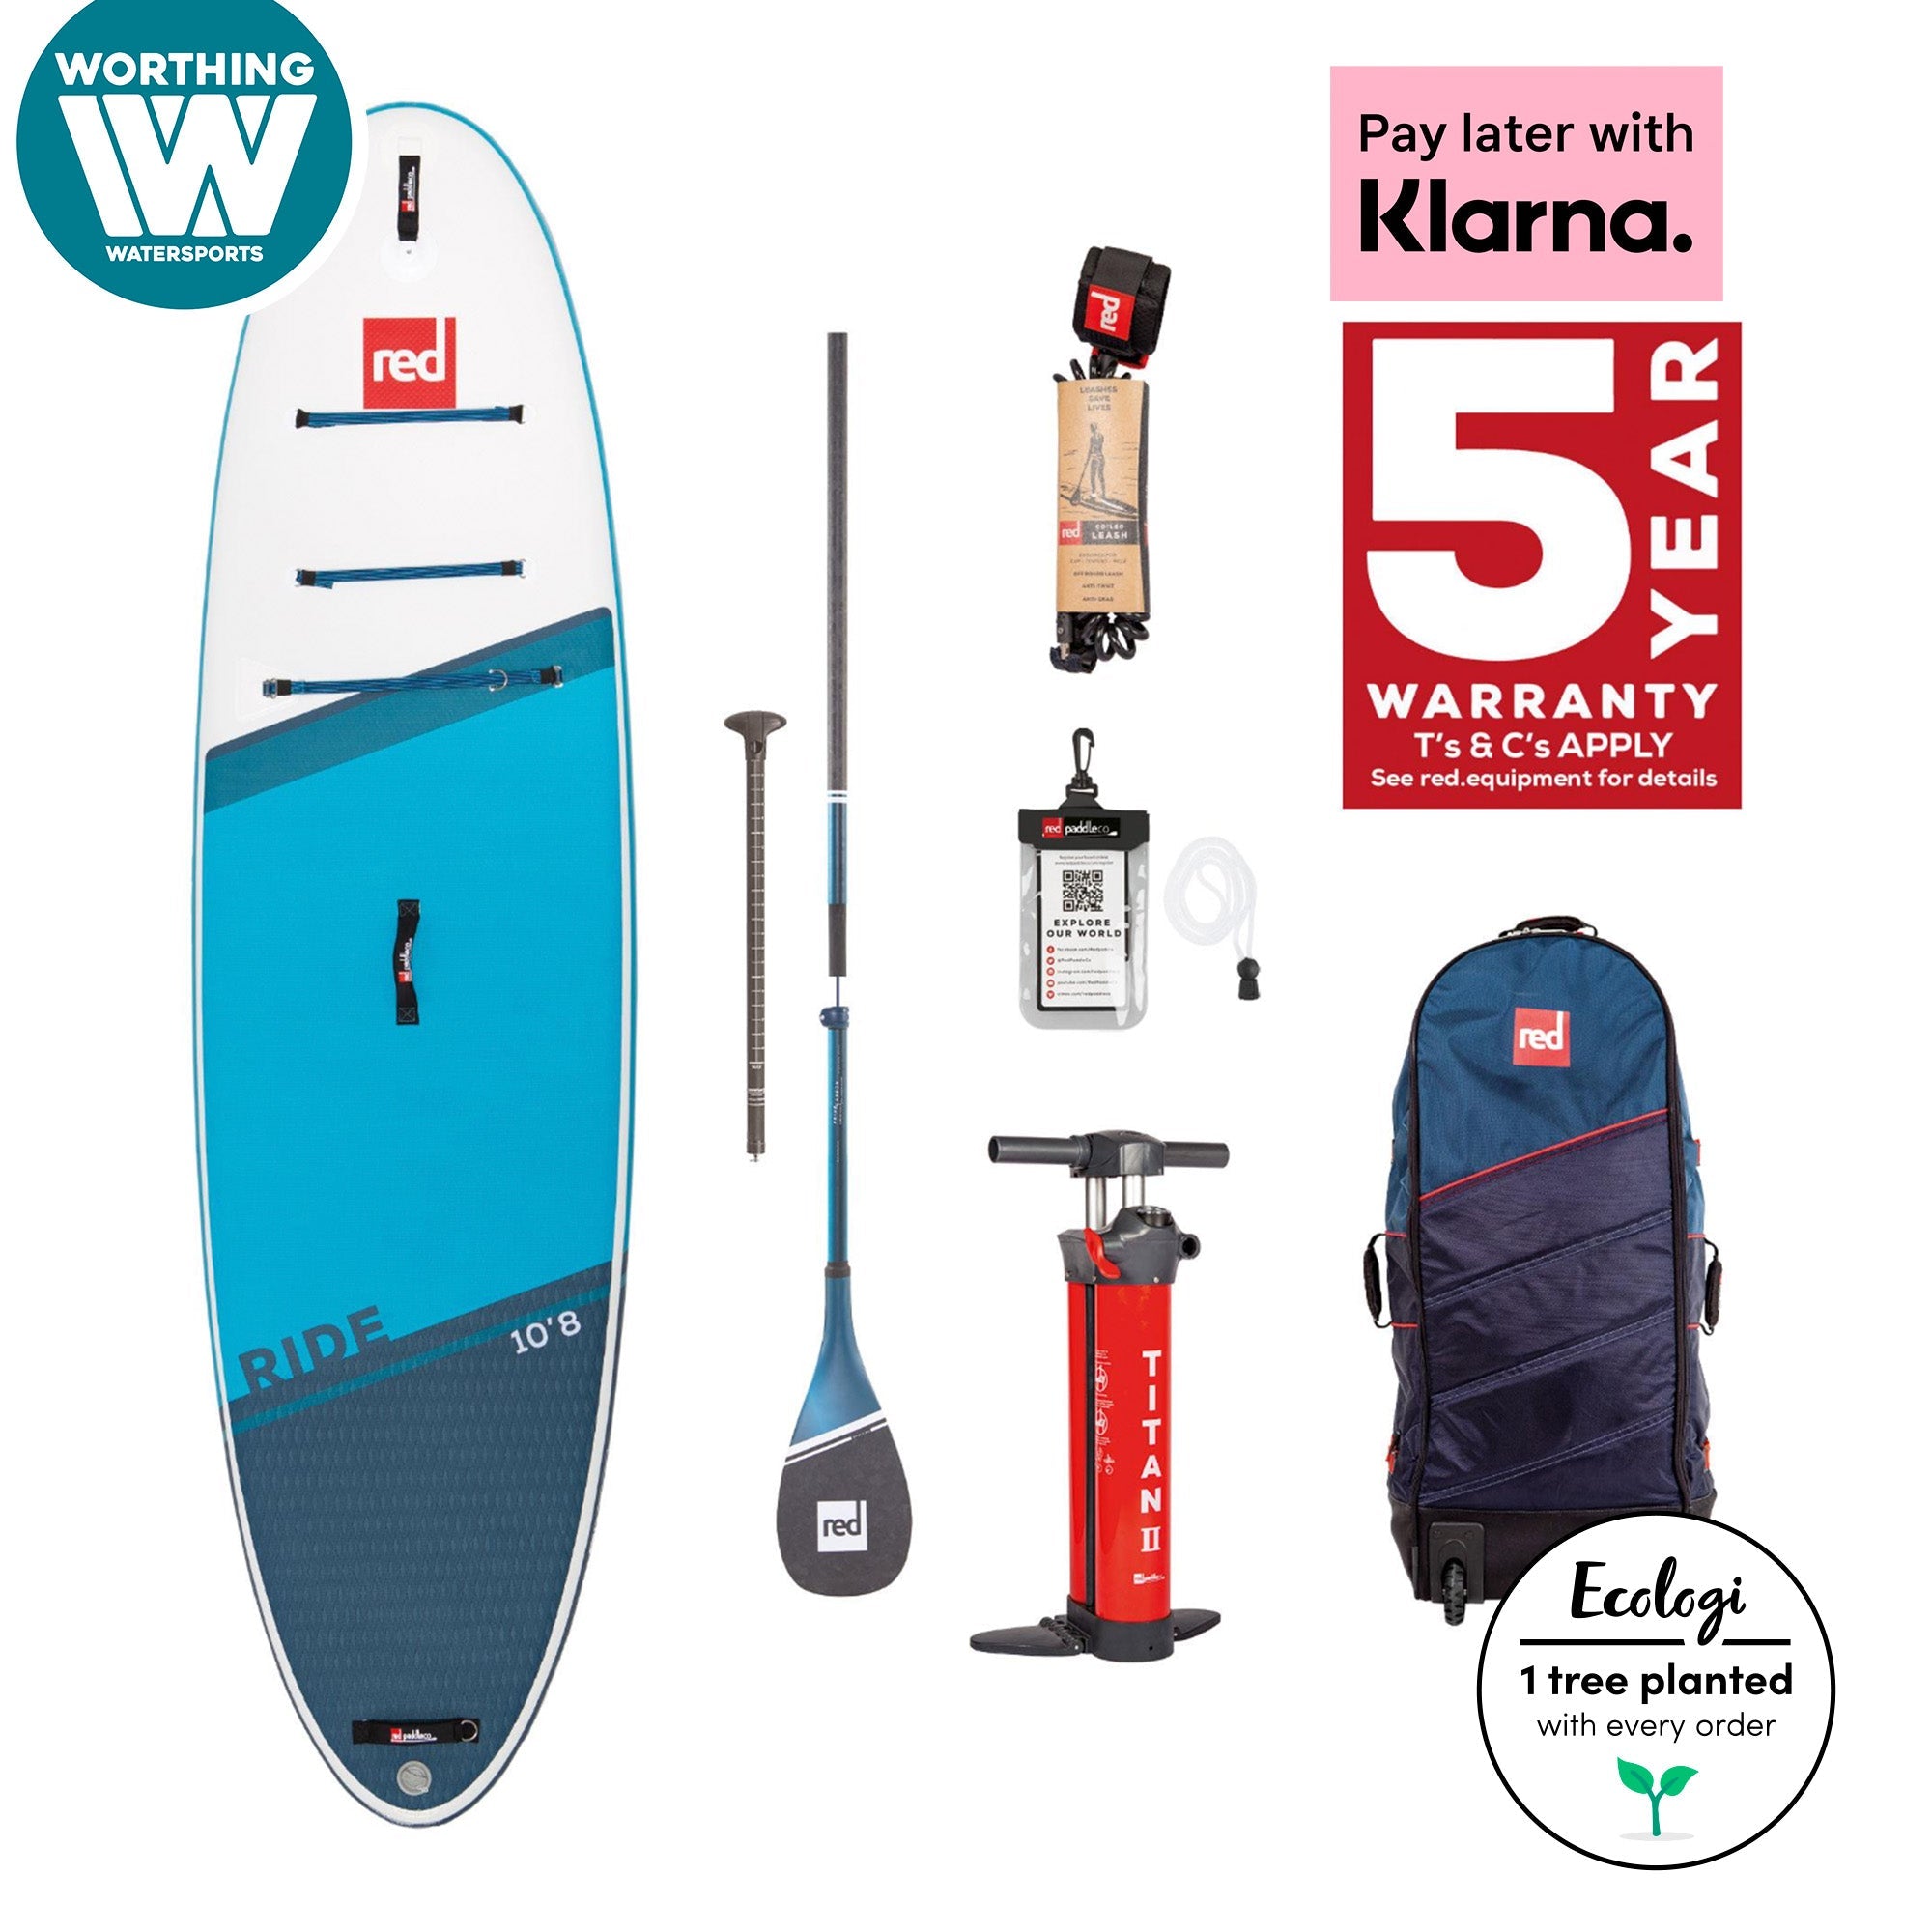 Red Paddle Co. 10’8″ RIDE MSL INFLATABLE PADDLE BOARD PACKAGE - Worthing Watersports - 001-012-001-0040 - iSUP Packages - Red Paddle Co